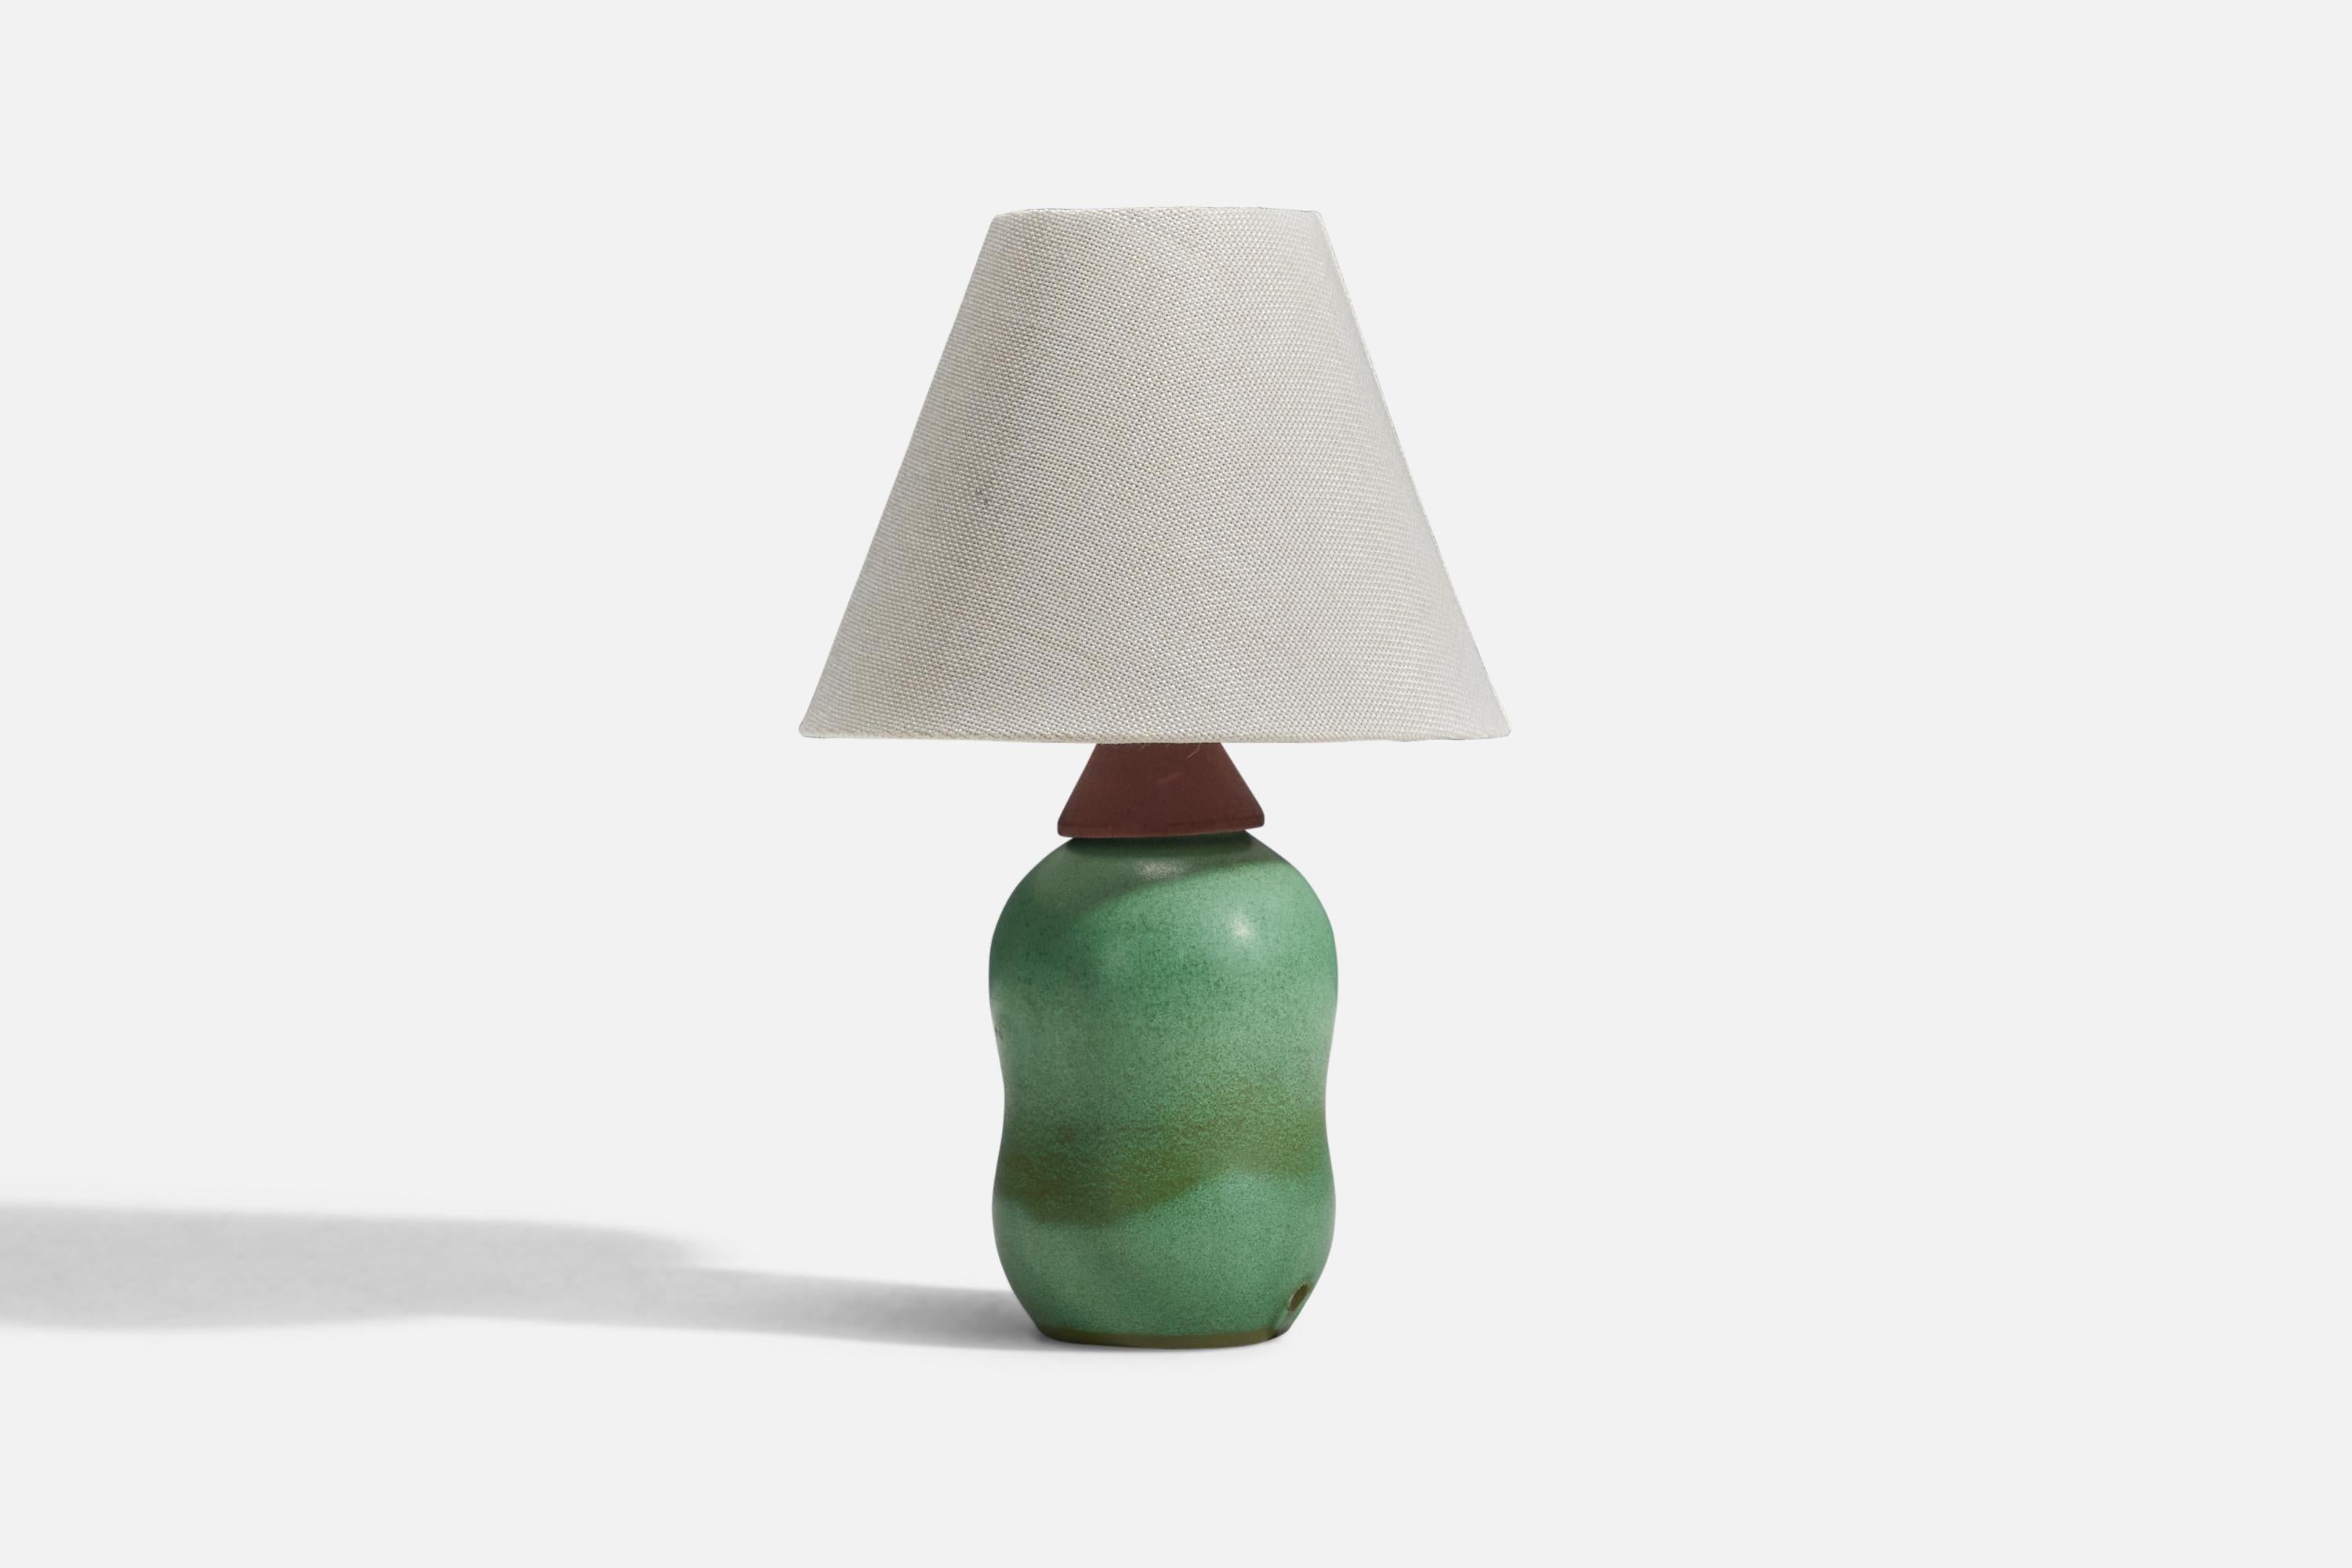 A green glazed stoneware and teak table lamp designed and produced in Sweden, 1950s.

Sold without lampshade
Dimensions of lamp (inches) : 9.62 x 3.93 x 3.93 (Height x Width x Depth)
Dimensions of lampshade (inches) : 3.5 x 8 x 6 (Top Diameter x